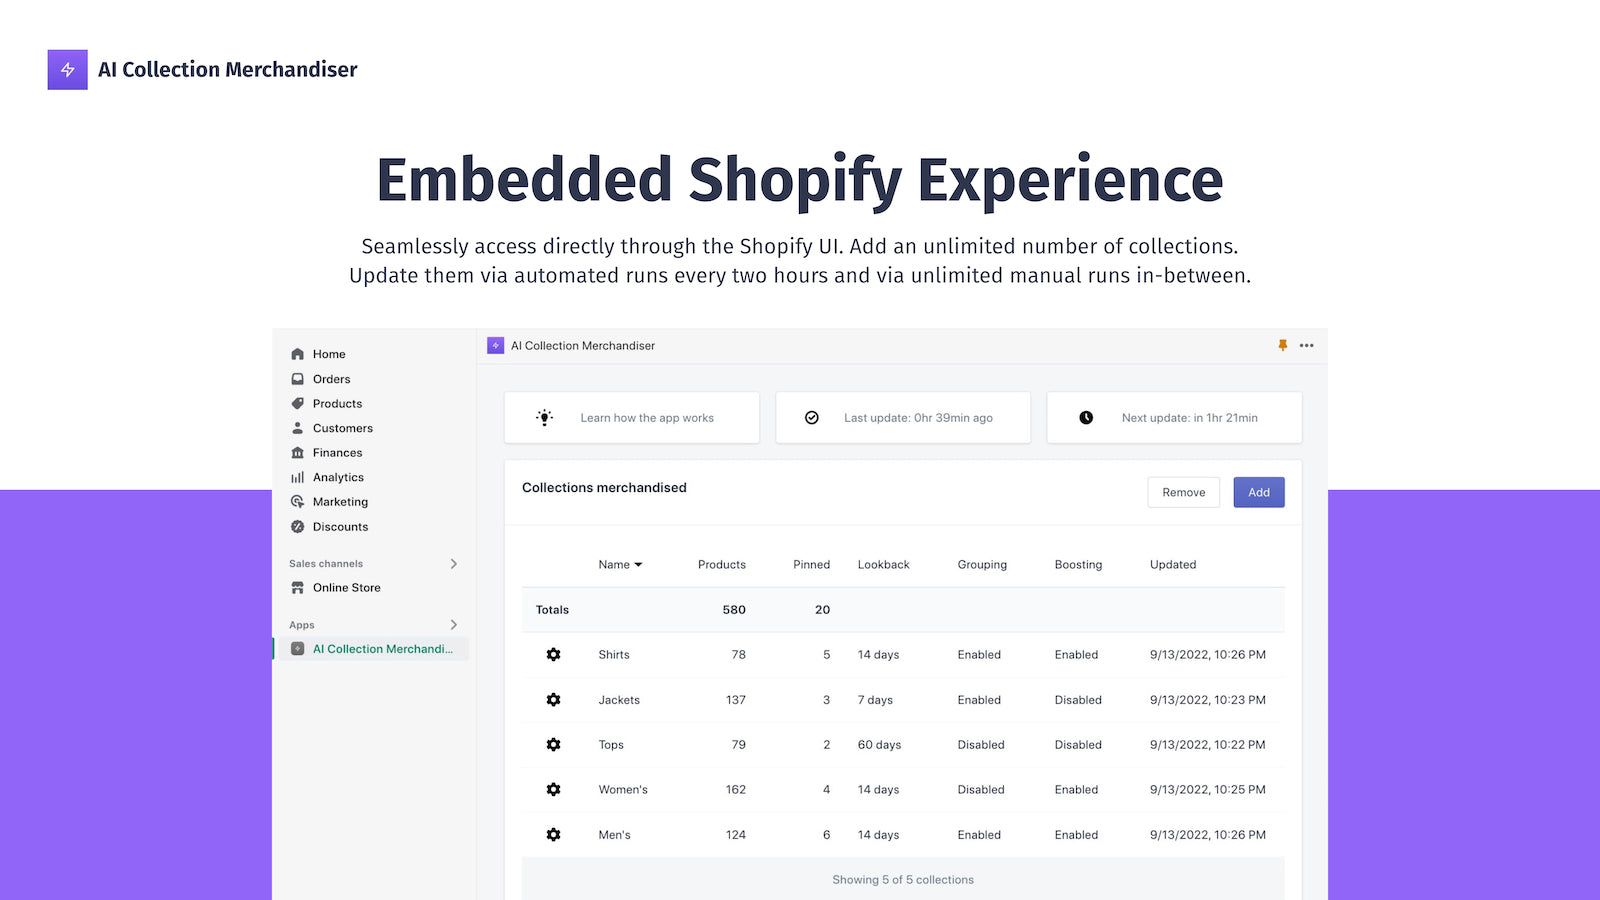 Embedded Shopify experience. Unlimited updates of product ranks